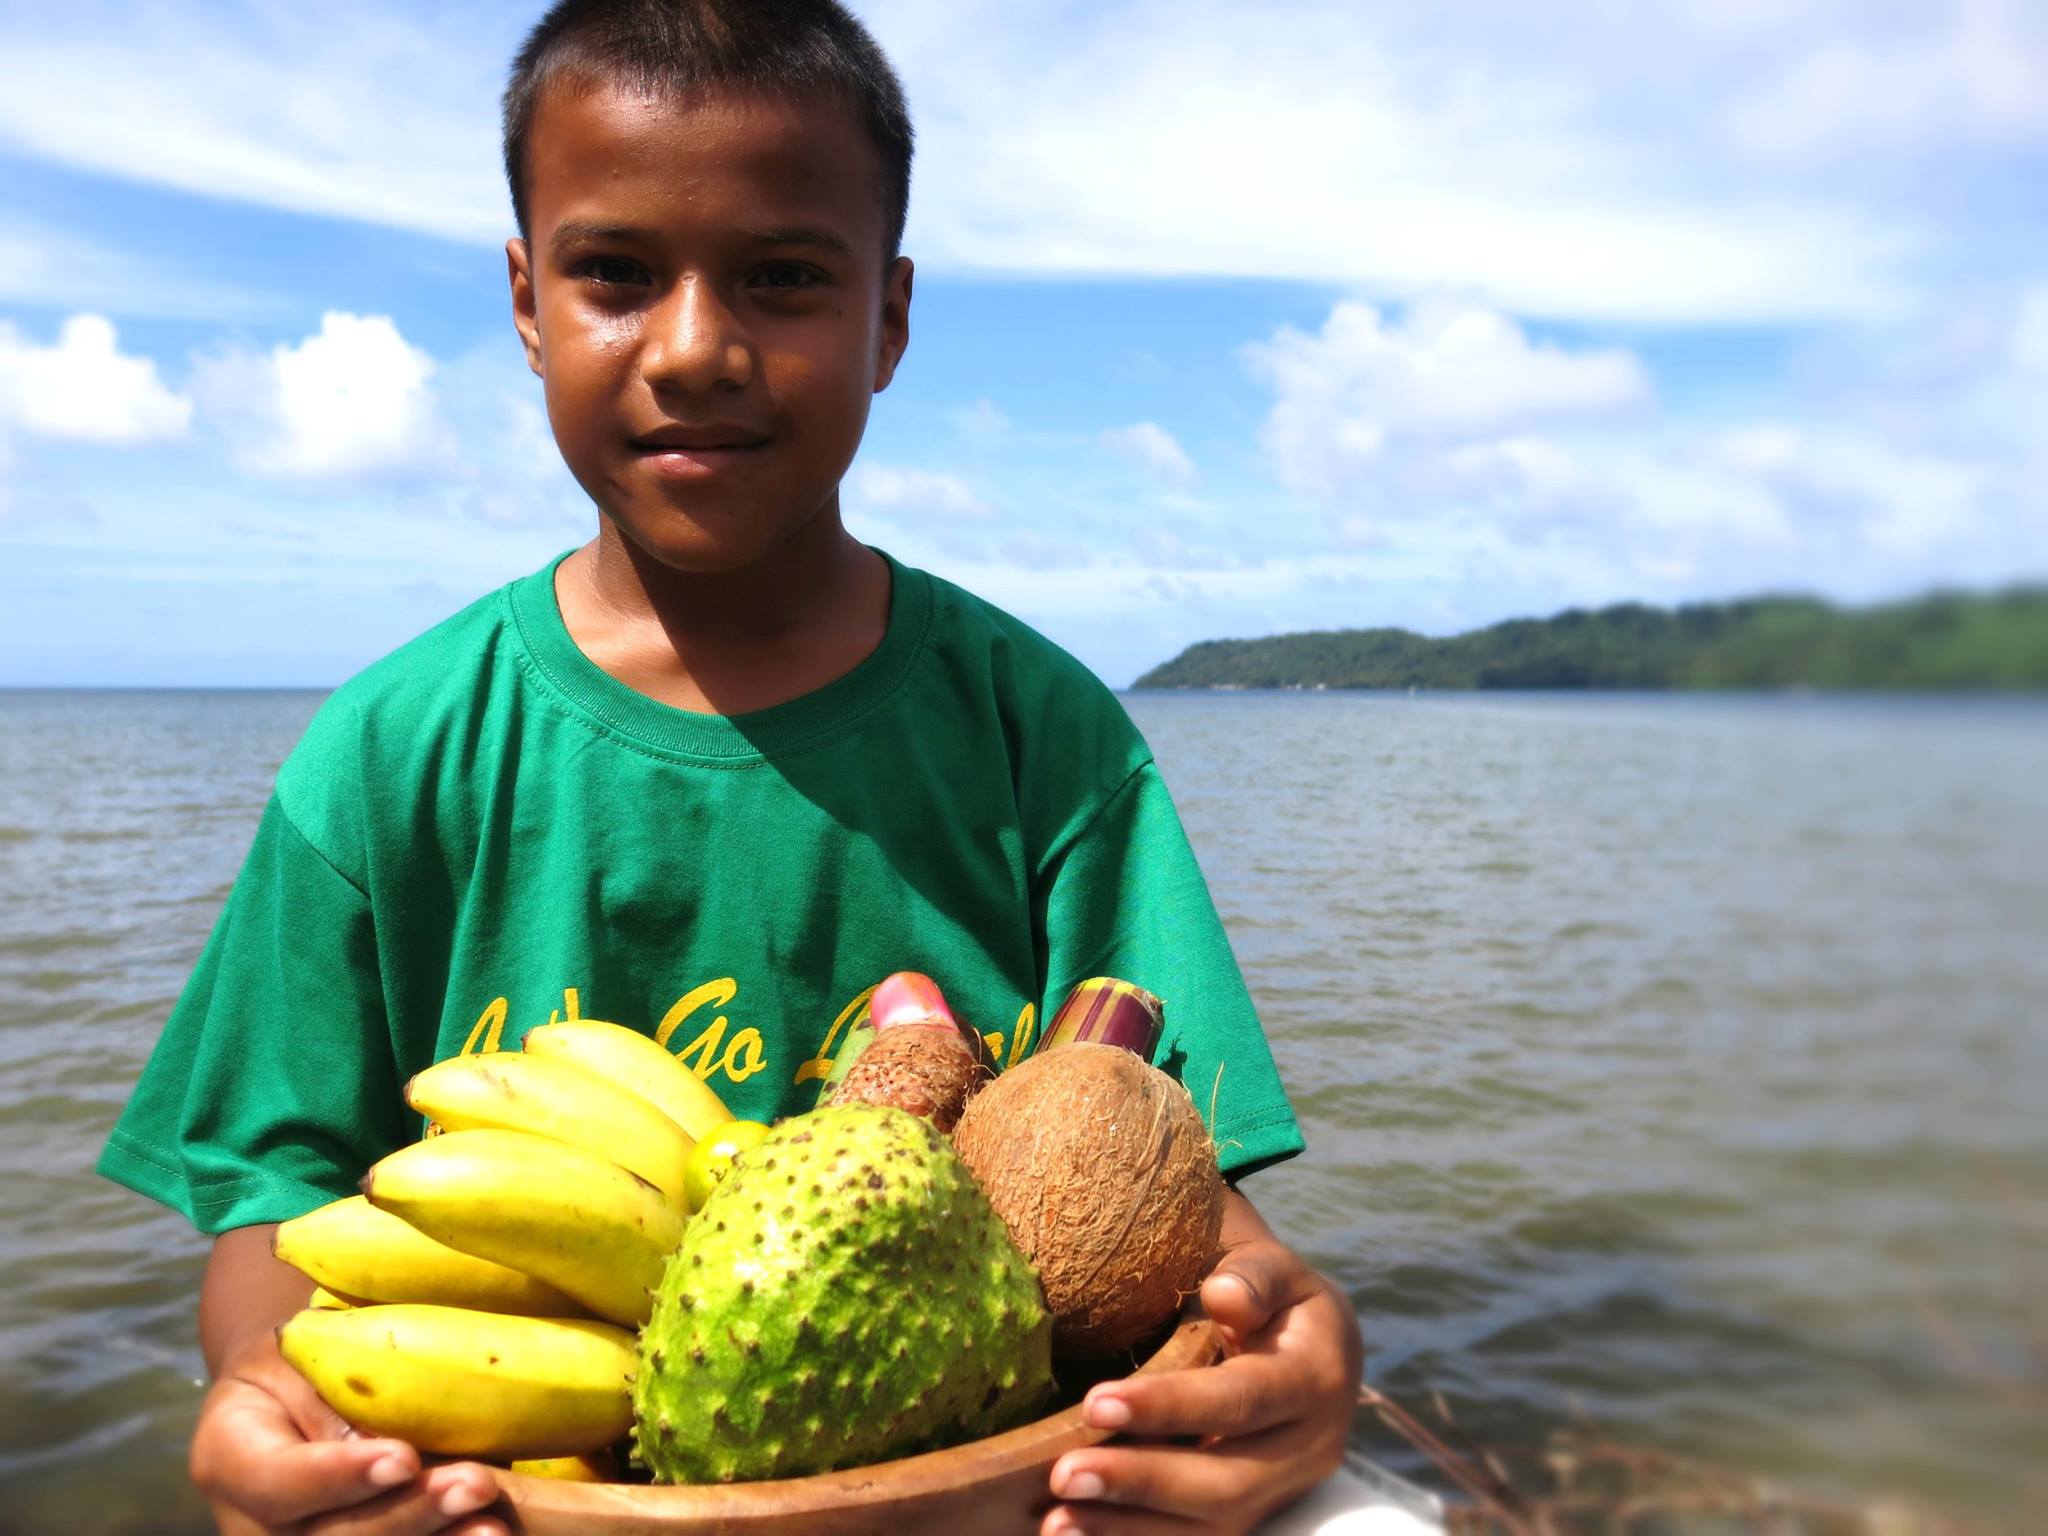 Young boy from Federated States of Micronesia (FSM) poses for a photo holding a bowl of fresh fruit.